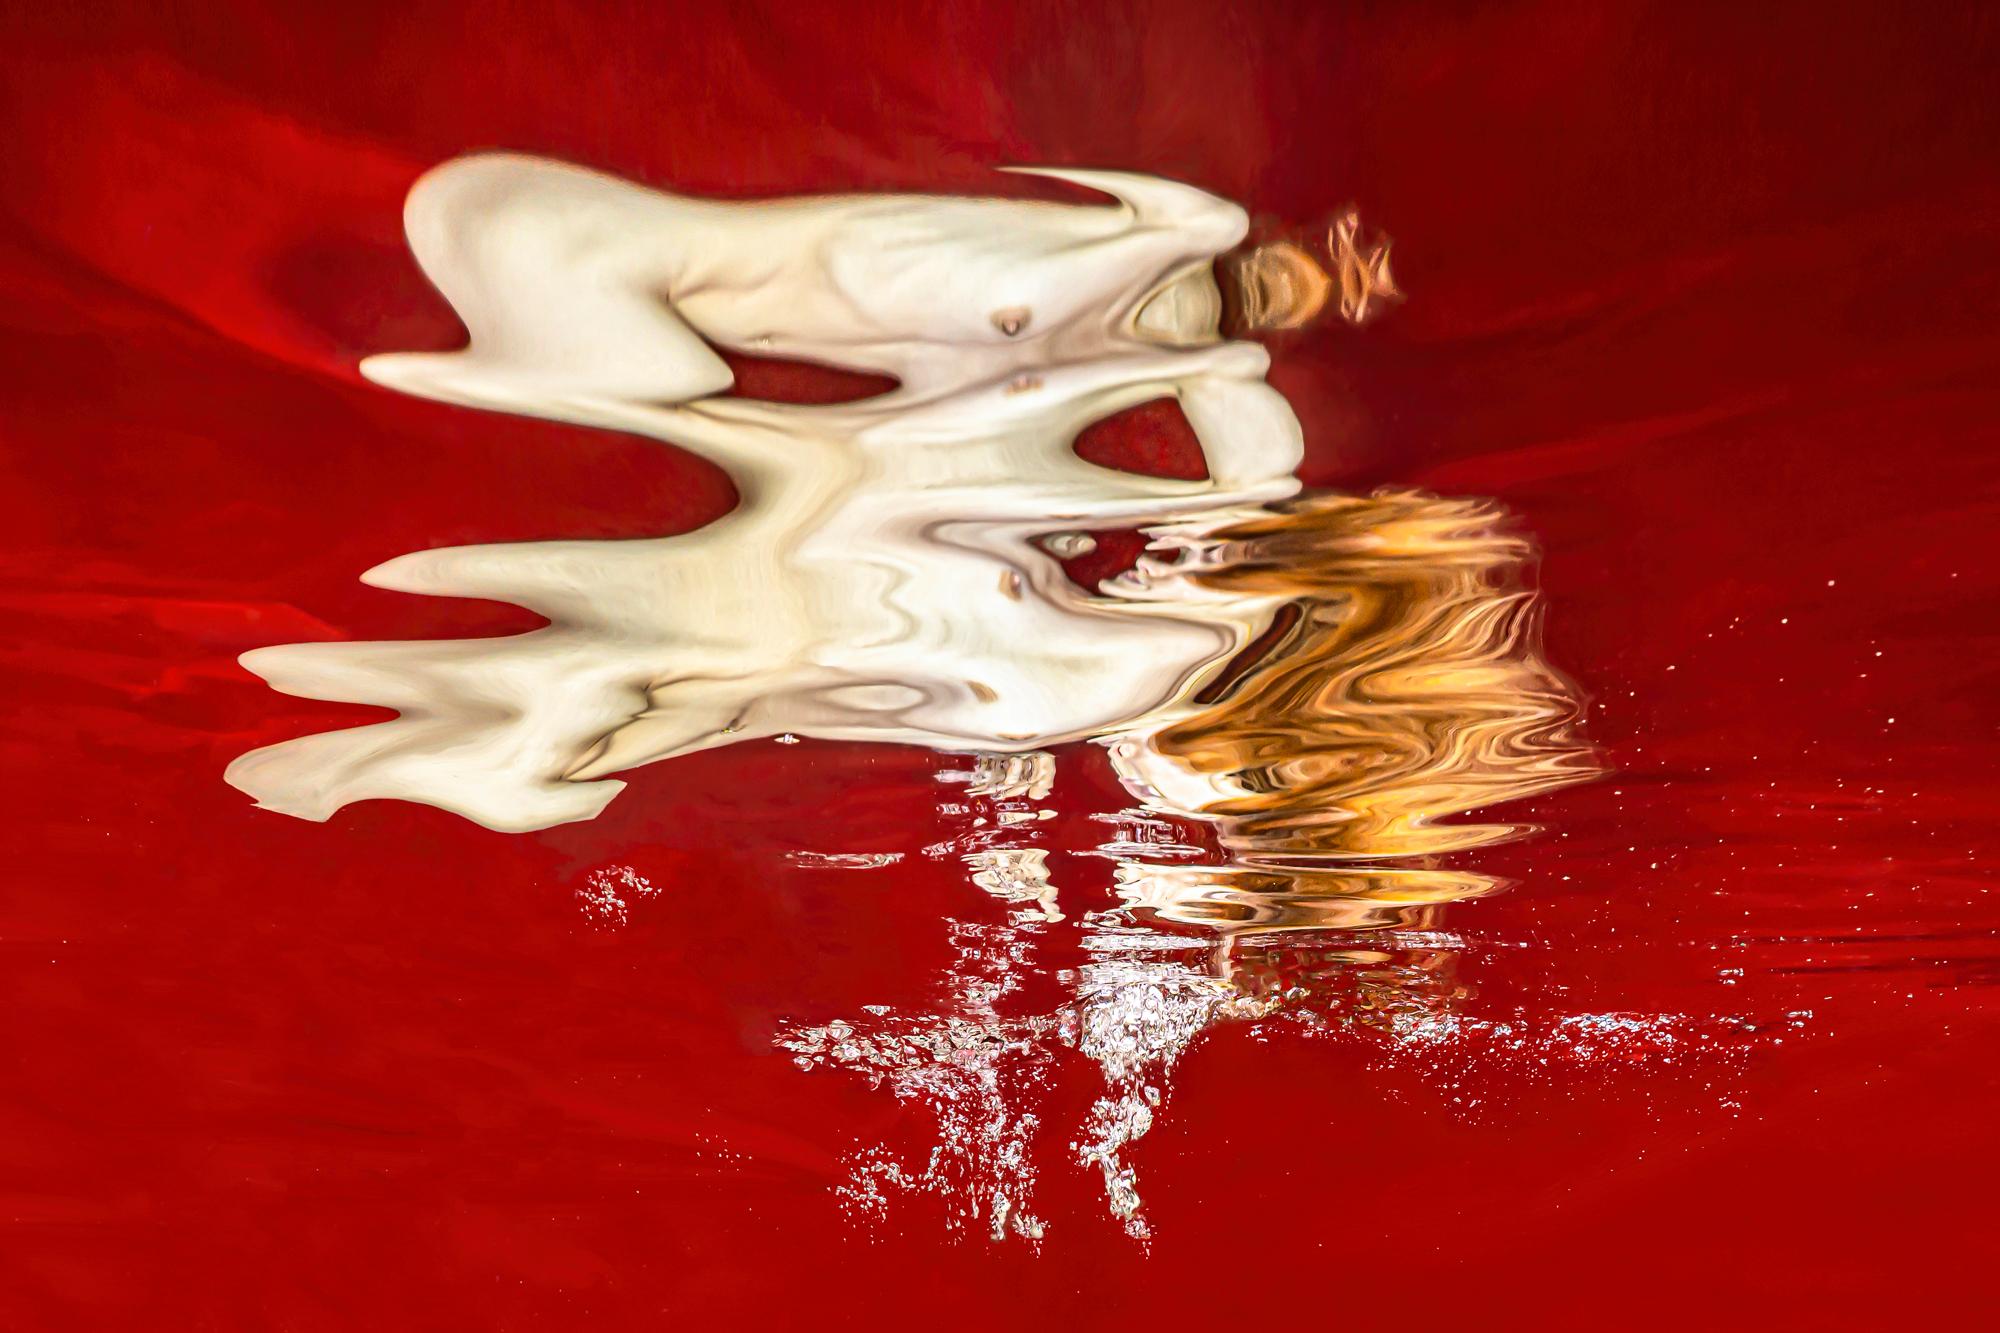 Alex Sher Nude Photograph - Spark - underwater nude photograph - series REFLECTIONS - archival pigment print